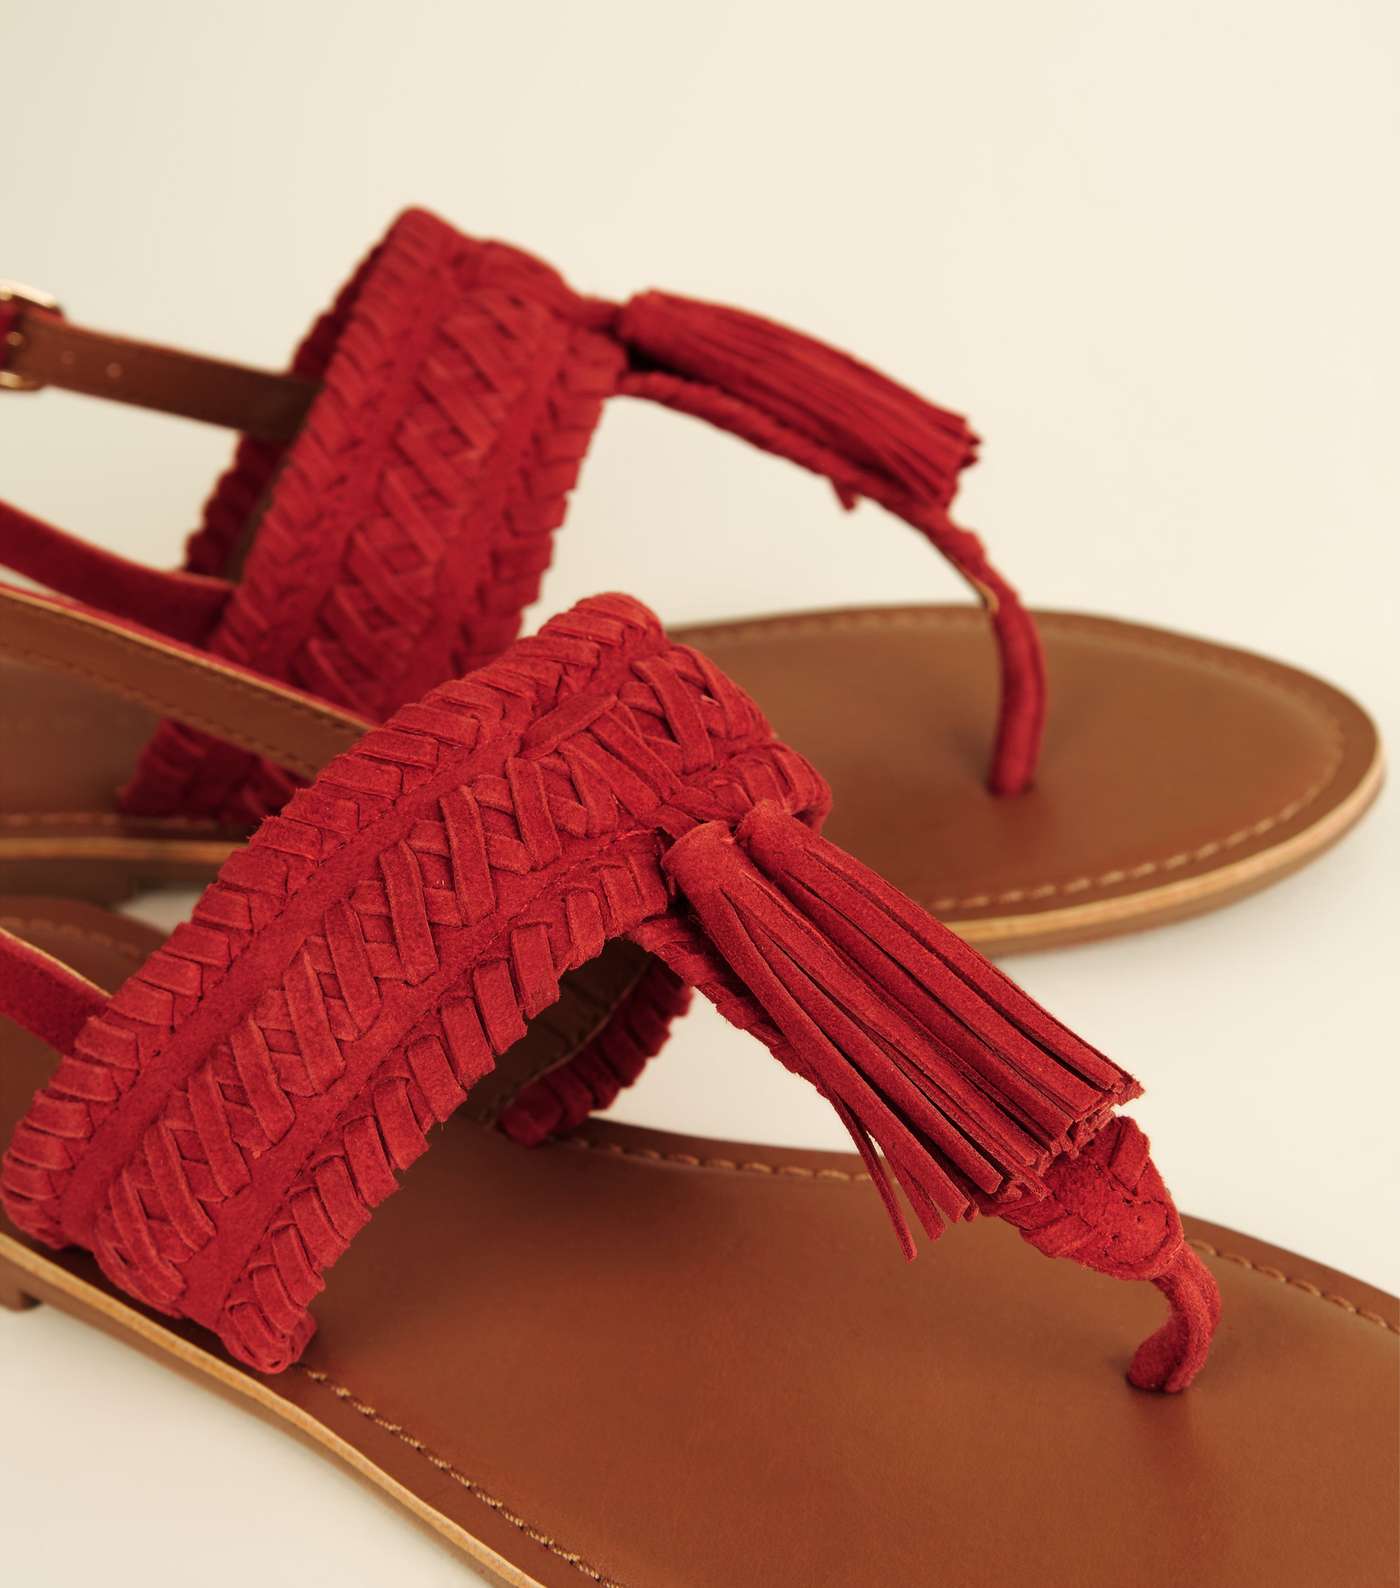 Wide Fit Red Suede Tassel Woven Strap Sandals Image 3